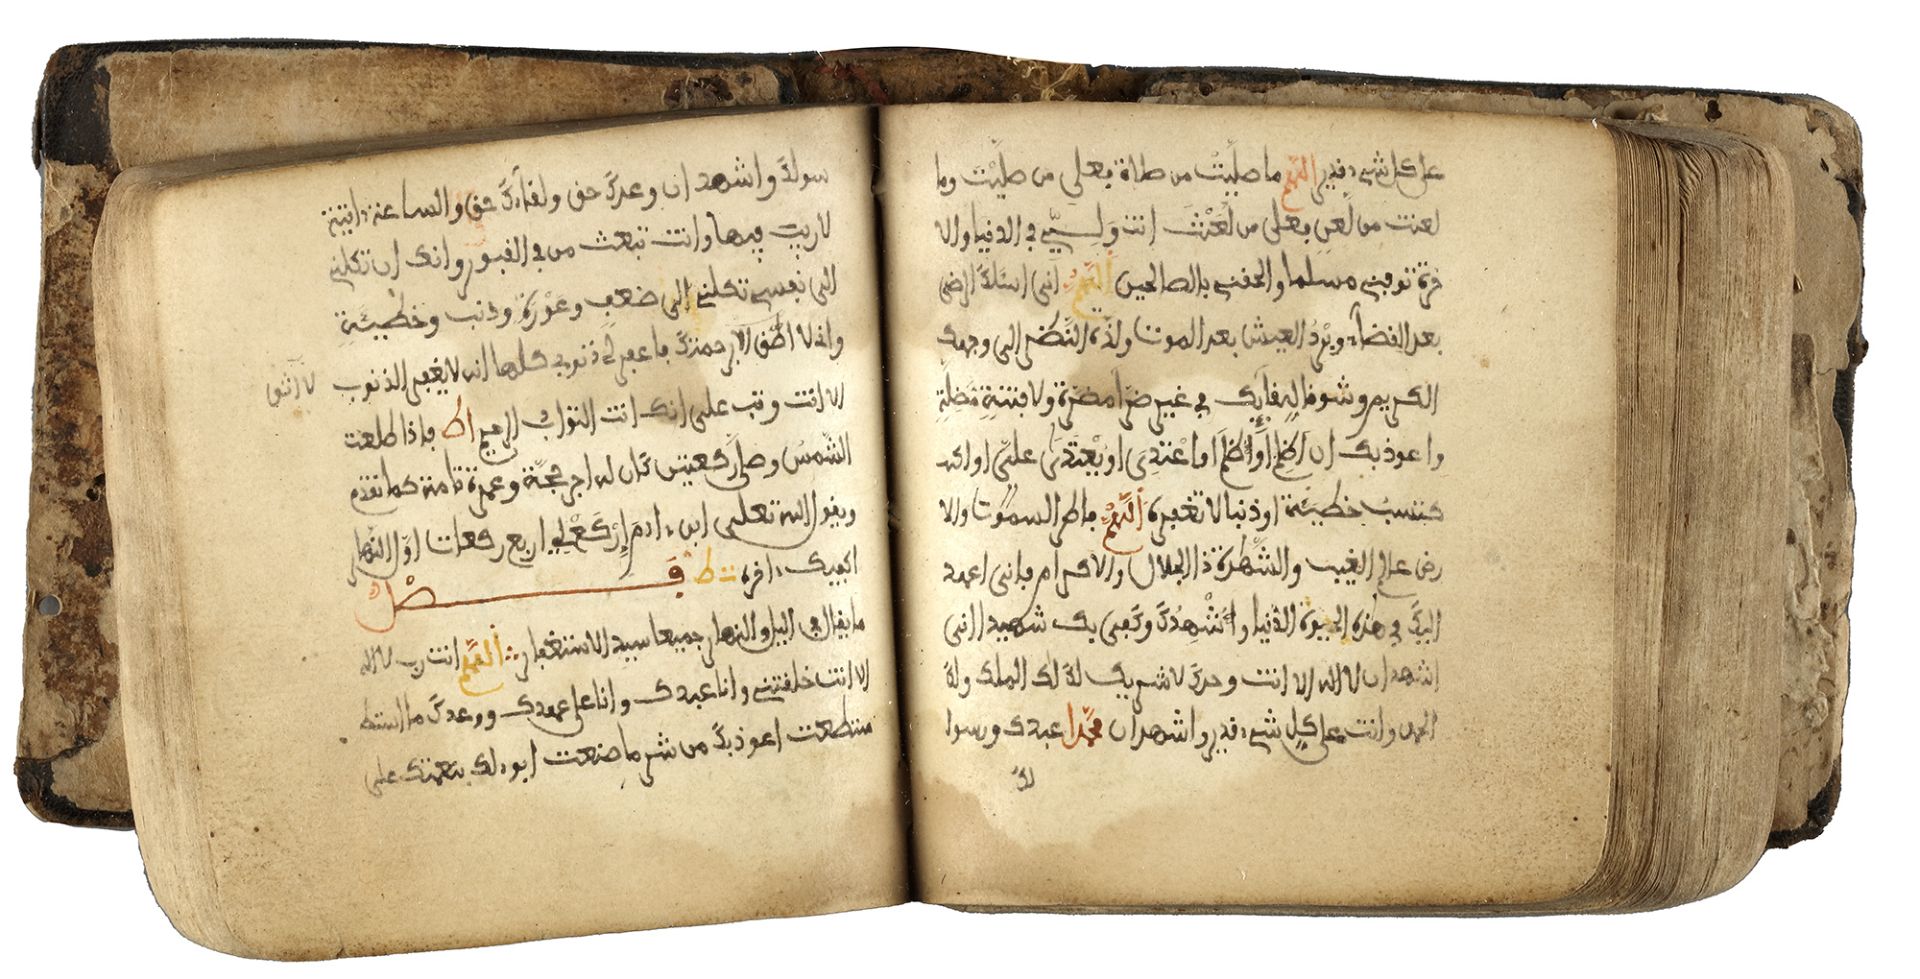 A COLLECTION OF MAGHRIBI PRAYERS, NORTH AFRICA, DATED 1203 AH/ 1788 AD - Image 7 of 10